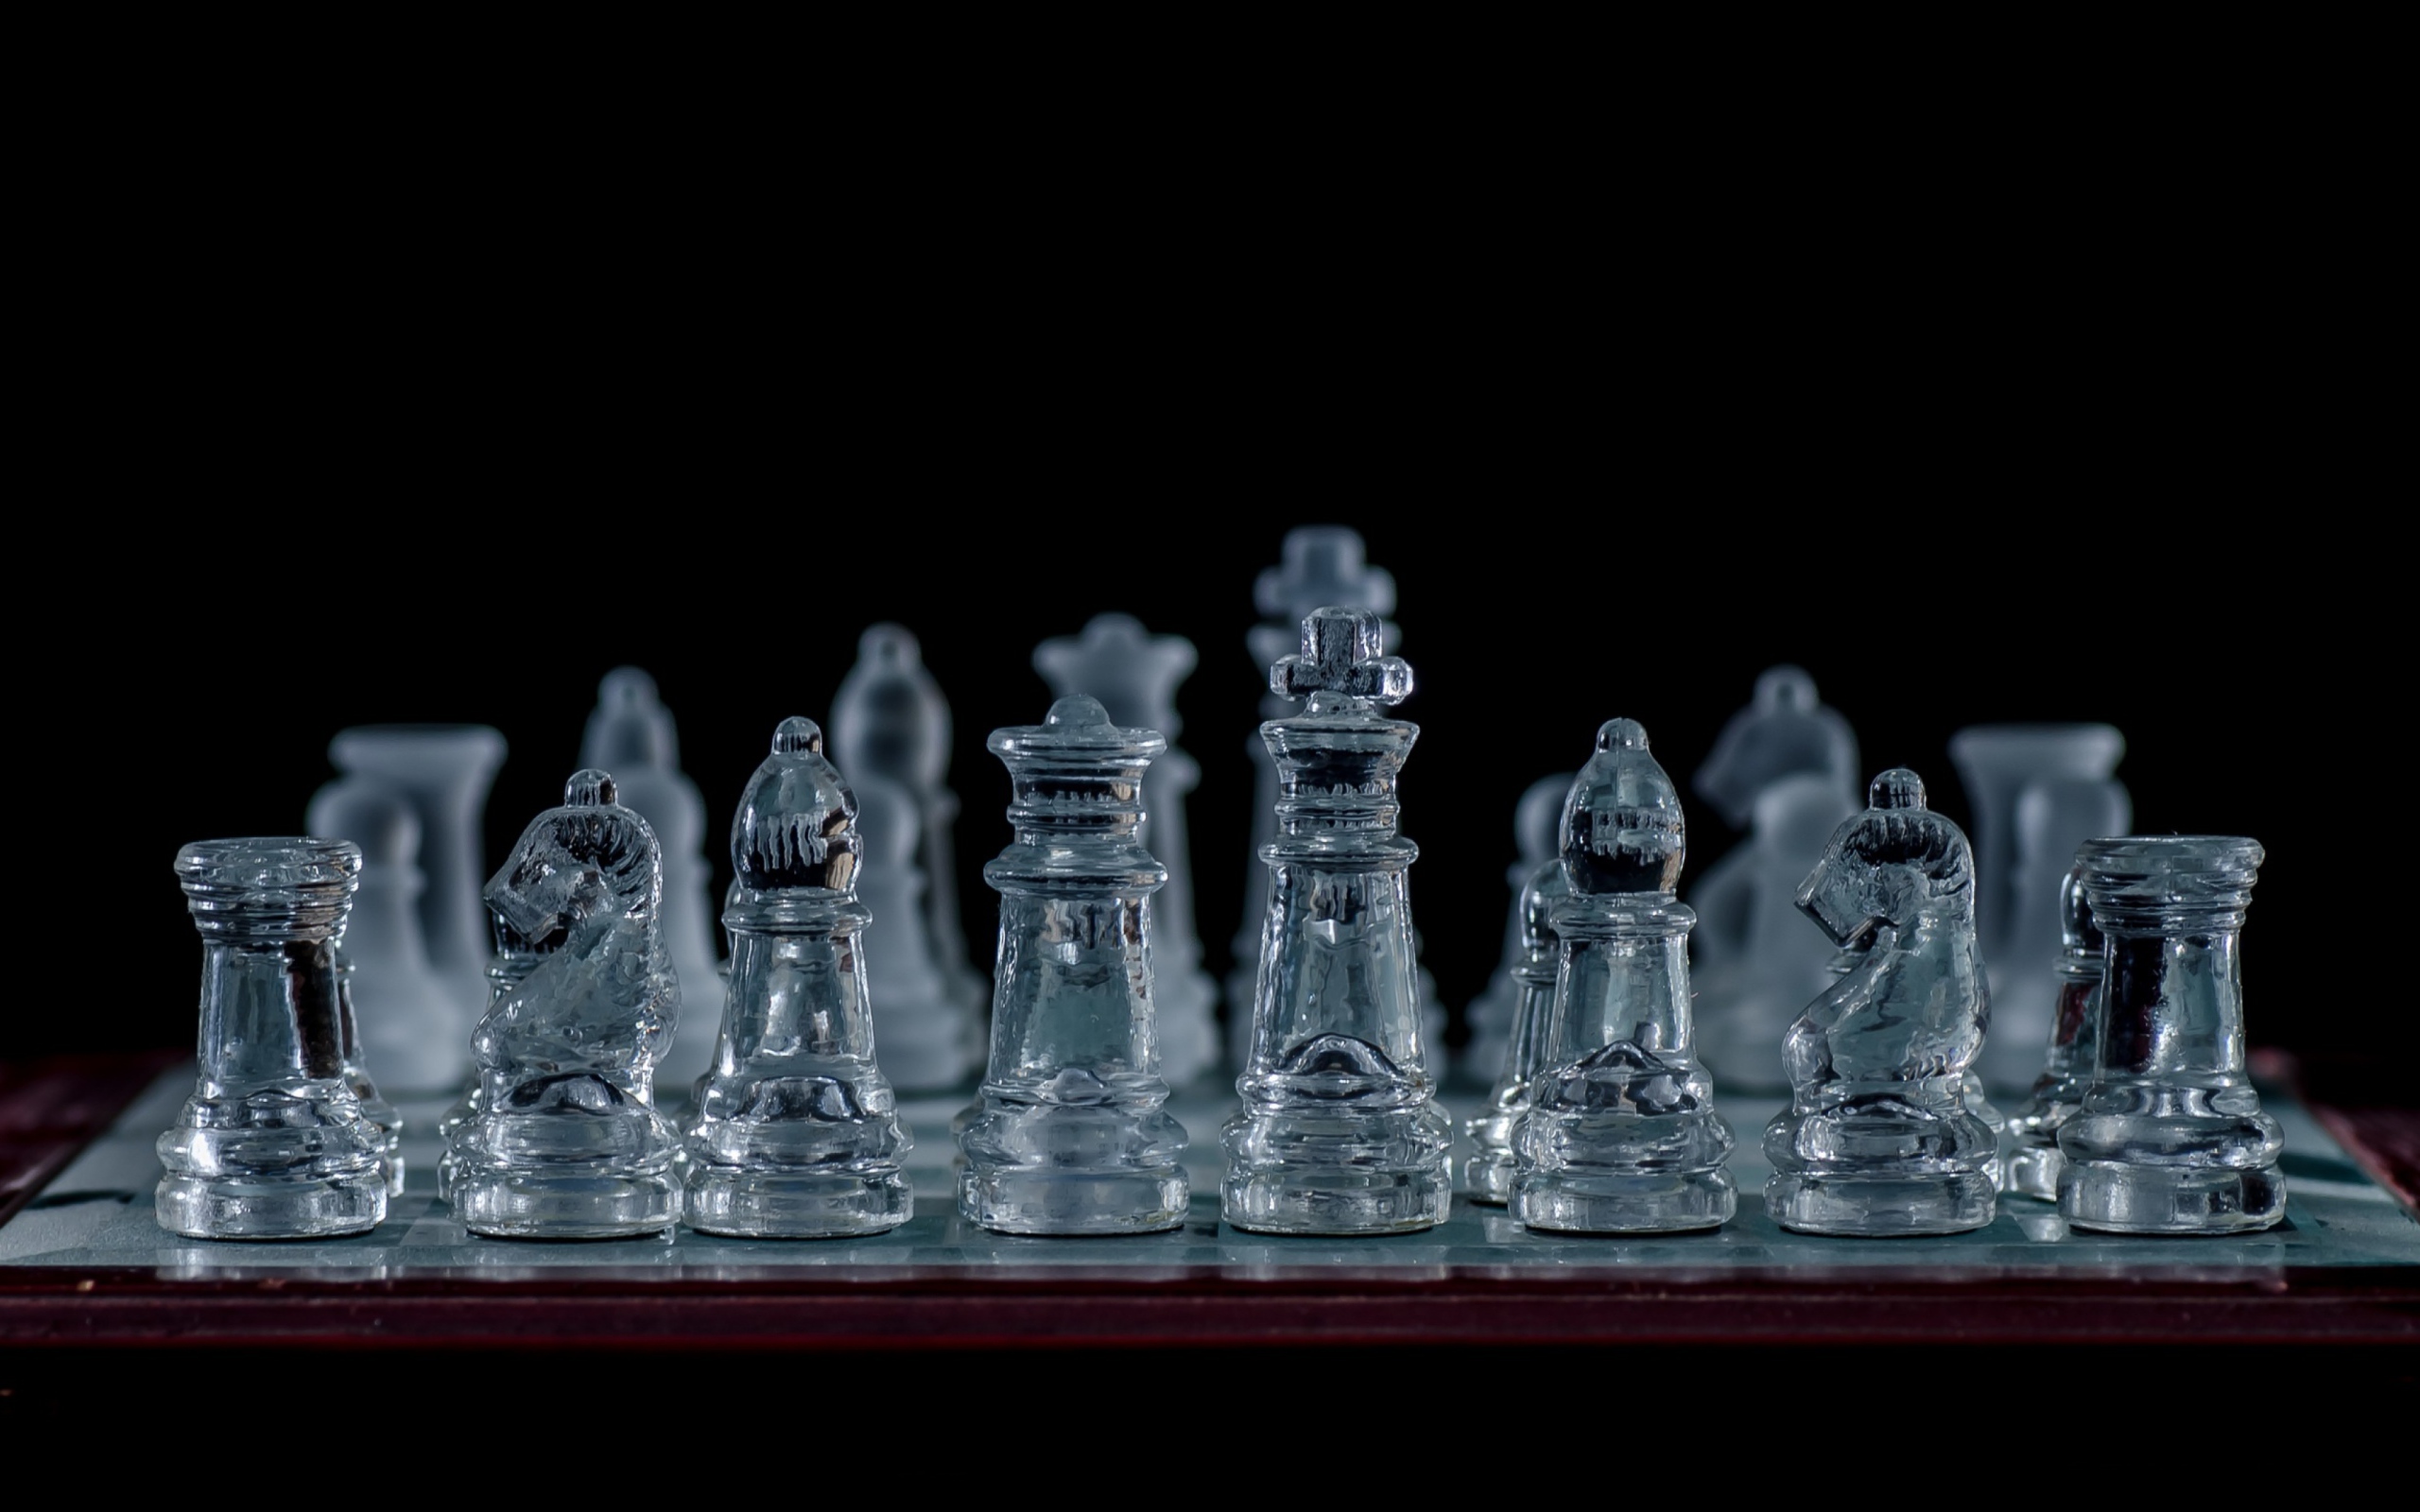 Glass chess on a chessboard on a black background